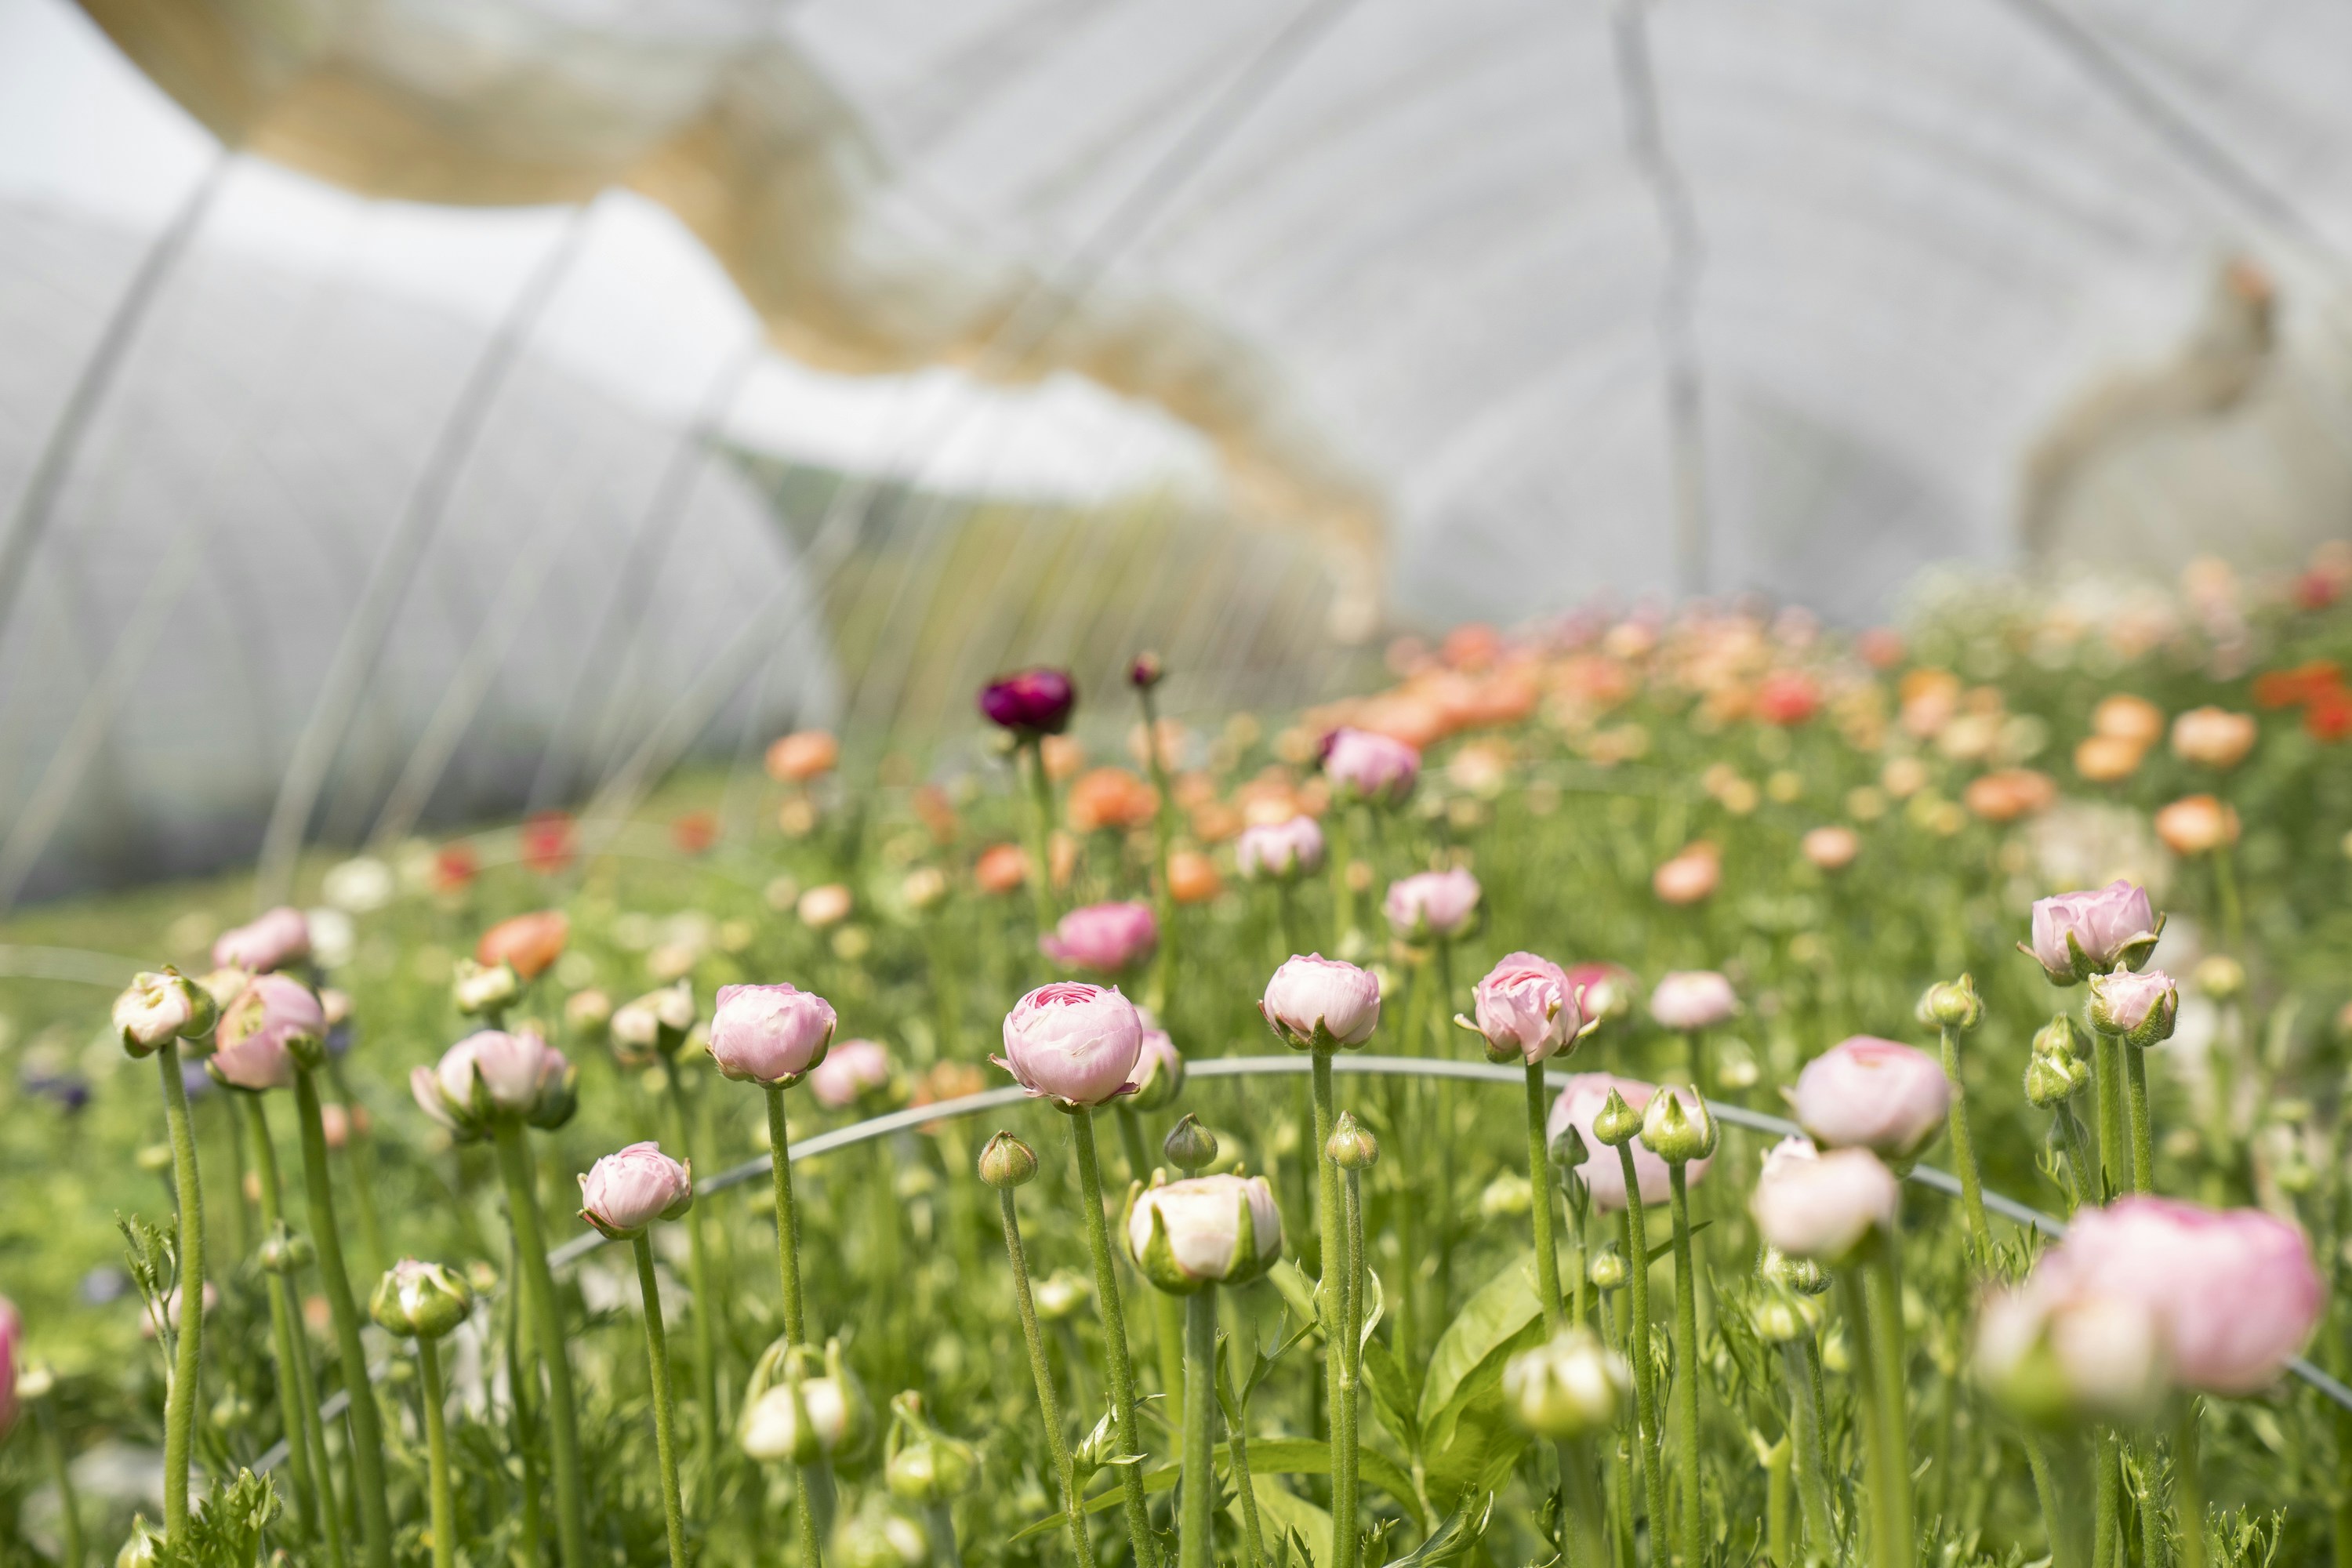 A high tunnel of blooming ranunculus at Pasture Song Farm in Pottstown, PA. Pasture Song is a small-scale, sustainable meat and cut-flower farm. More photography at http://zoeschaeffer.com and http://instagram.com/dirtjoy More from the farm at http://pasturesongfarm.com #regenerativeagriculture #organicfarming #regenerativefarming #farming #youngfarmers #flowerfarm